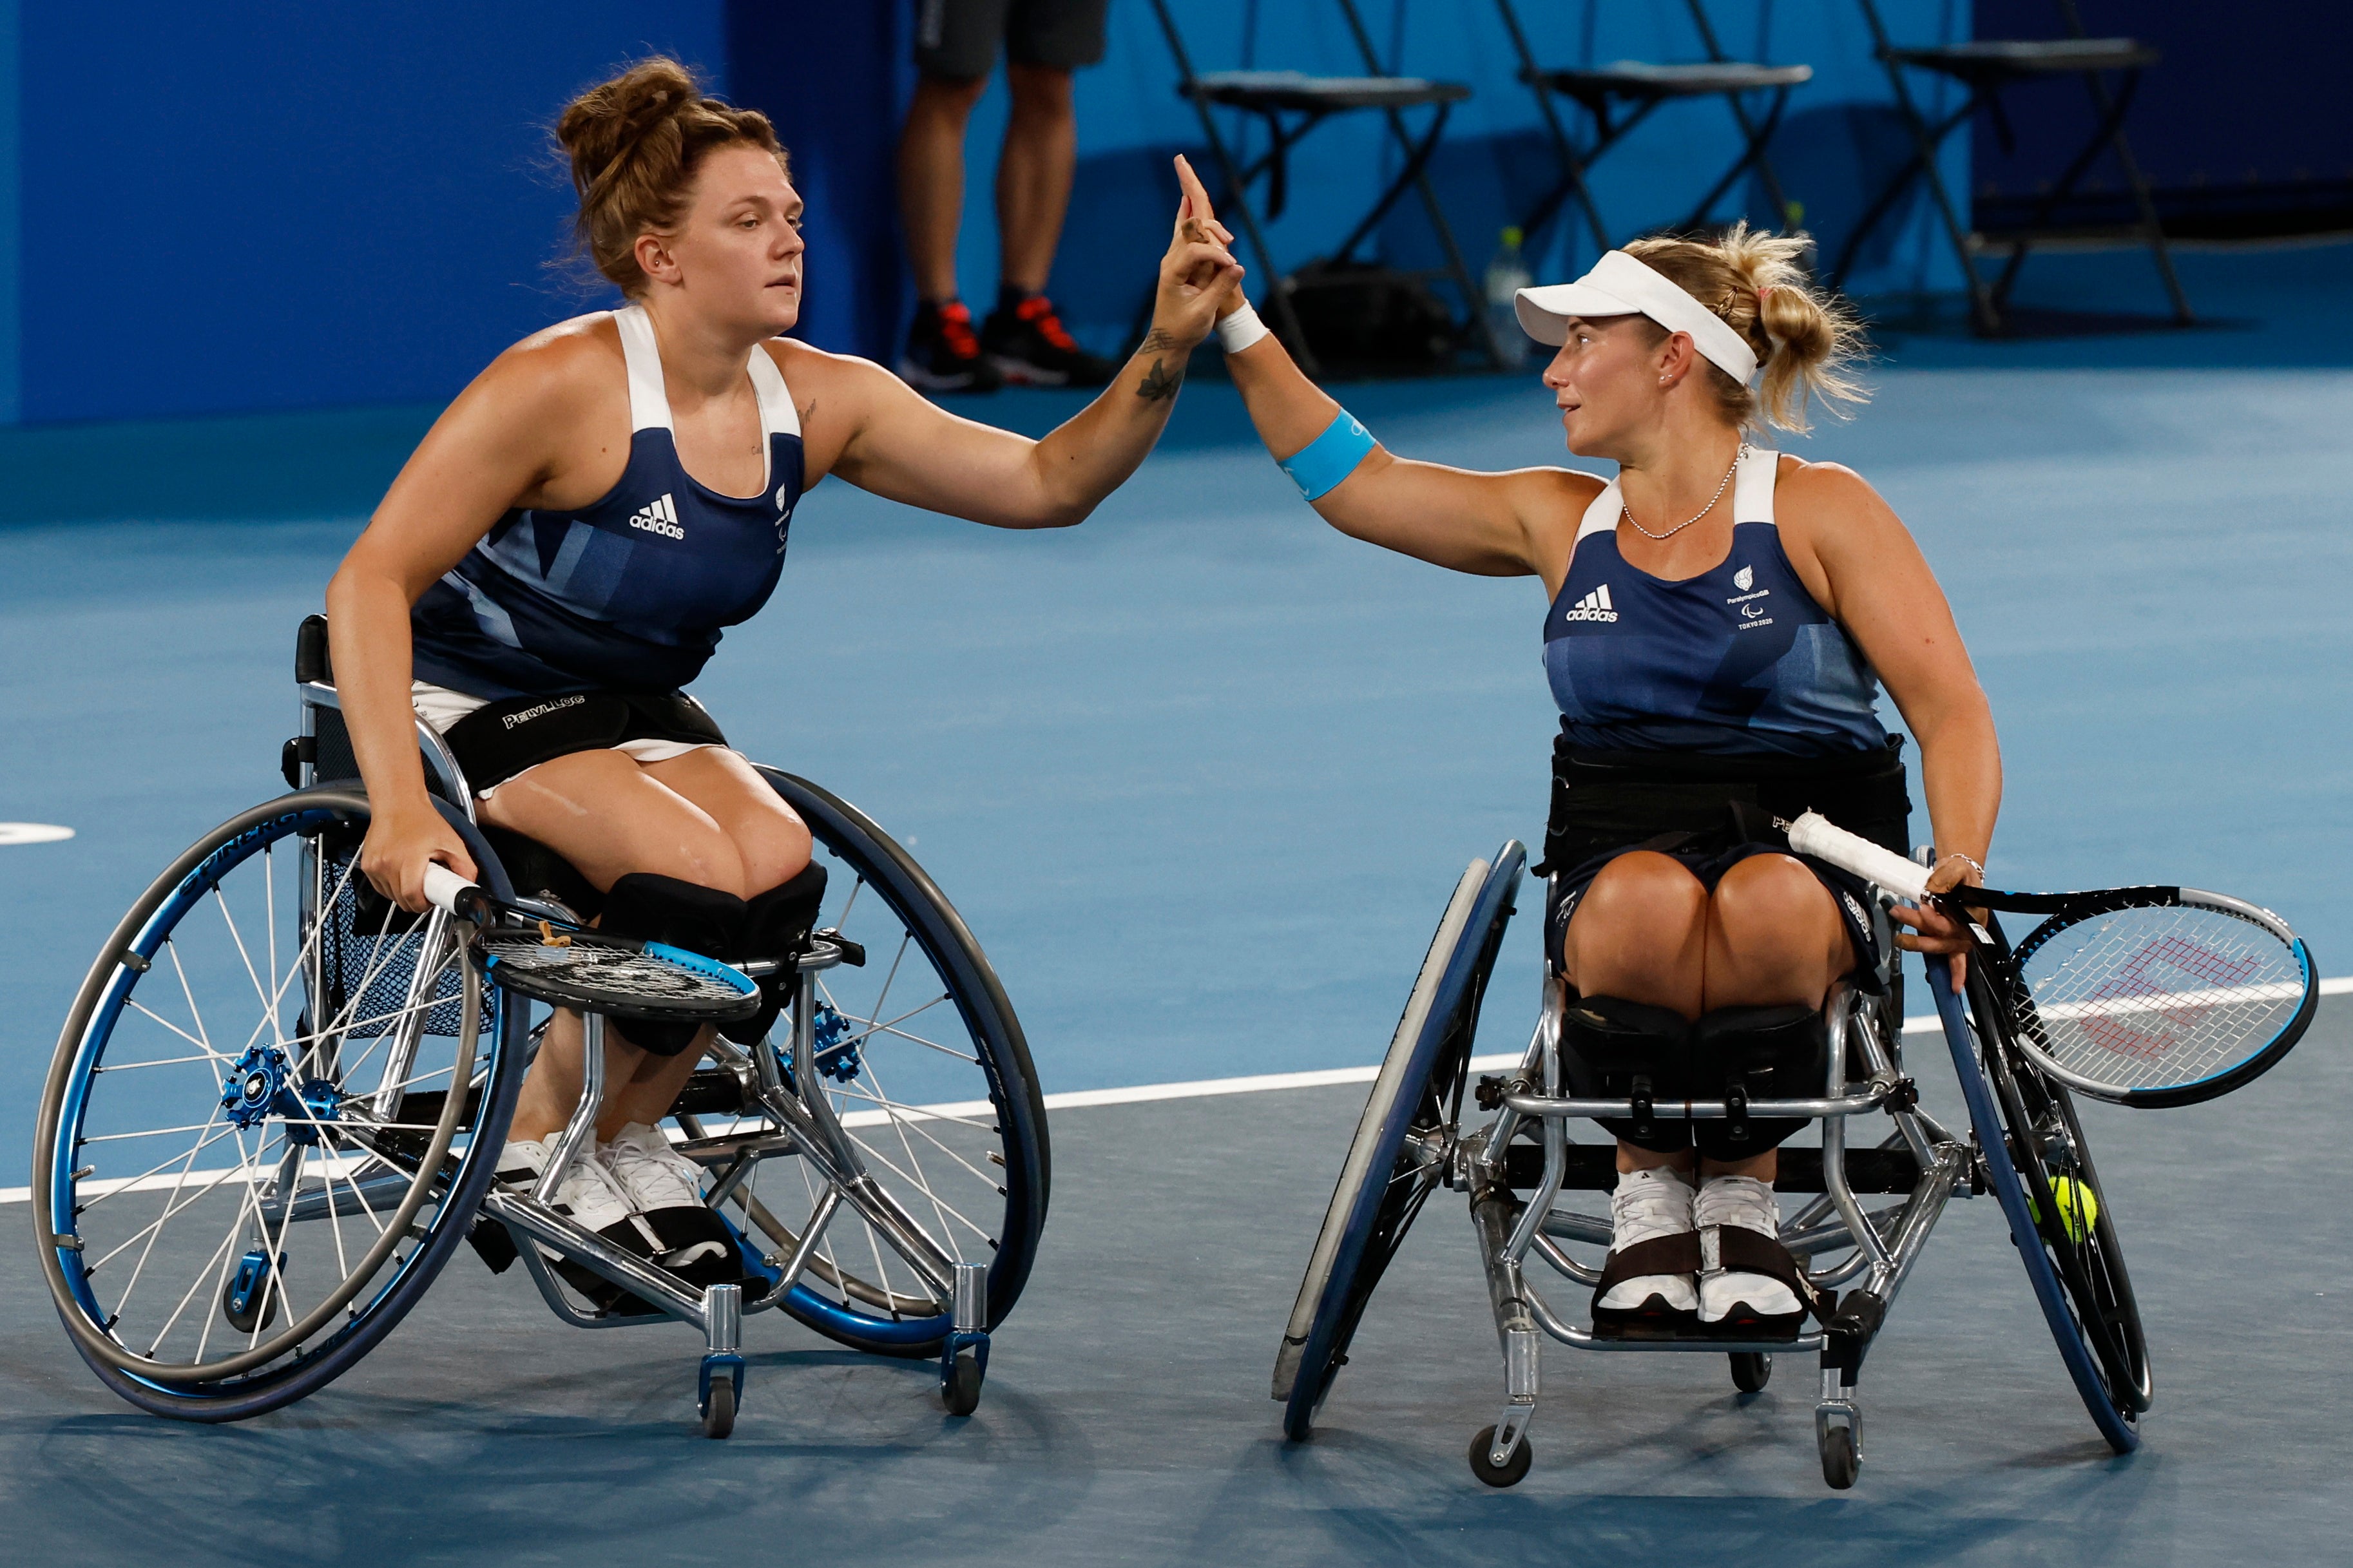 Lucy Shuker and Jordanne Whiley are into the doubles final